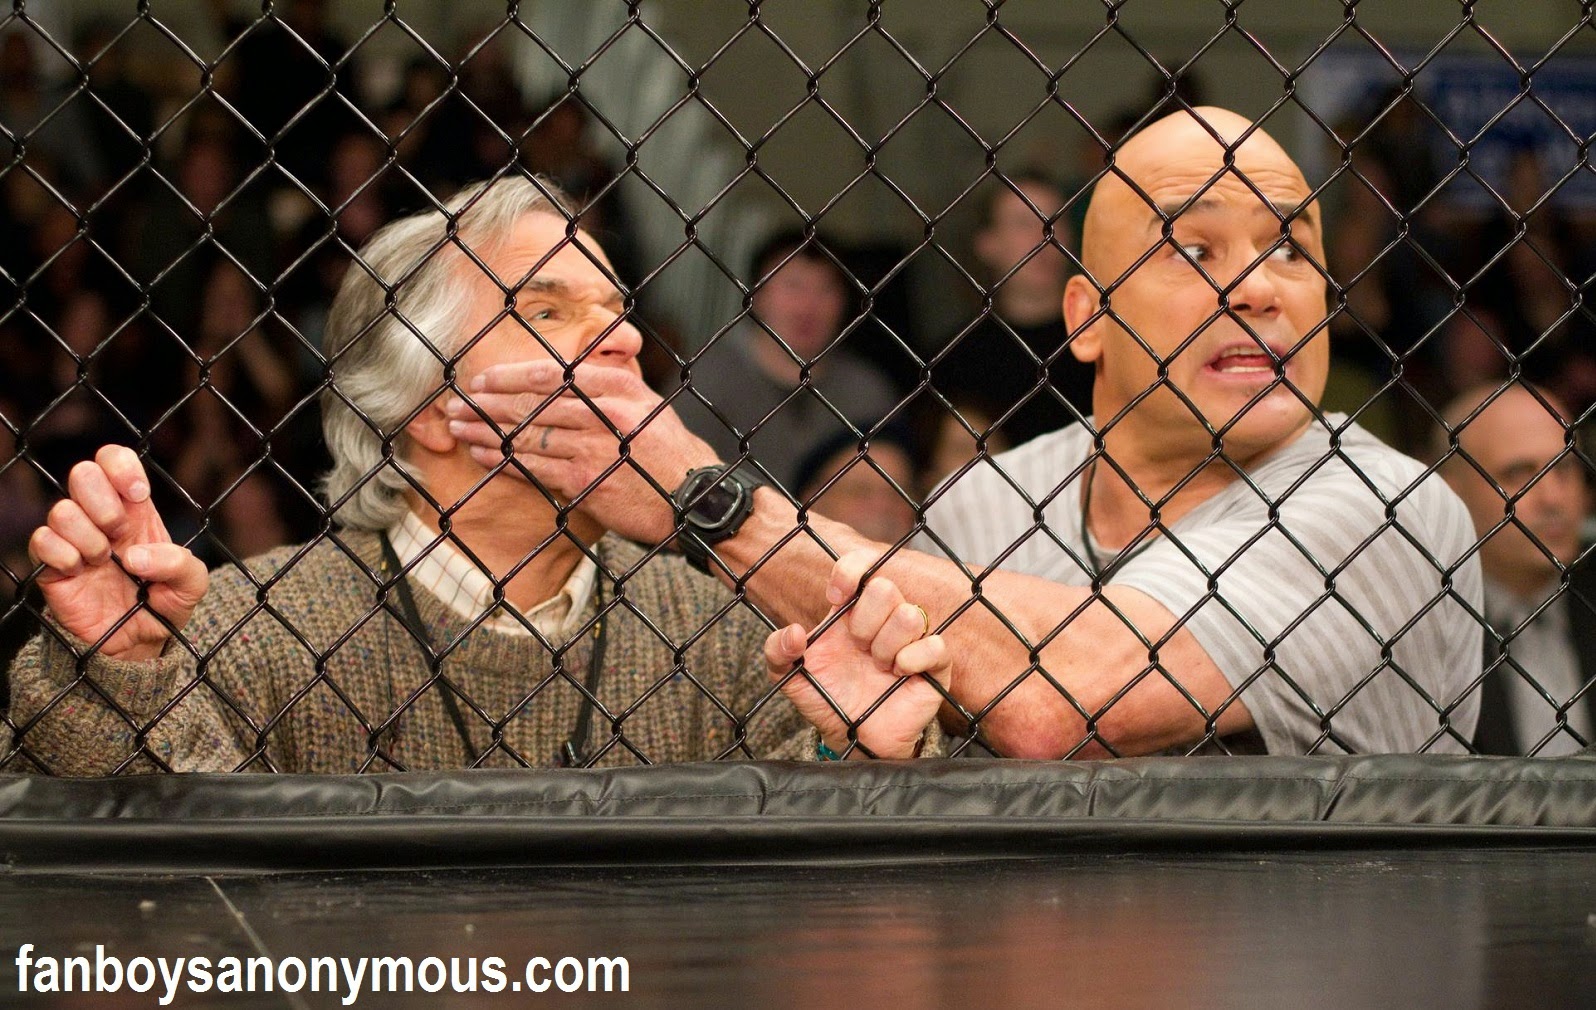 Dutch retired MMA champion Bas Rutten acting as coach in Kevin James MMA comedy